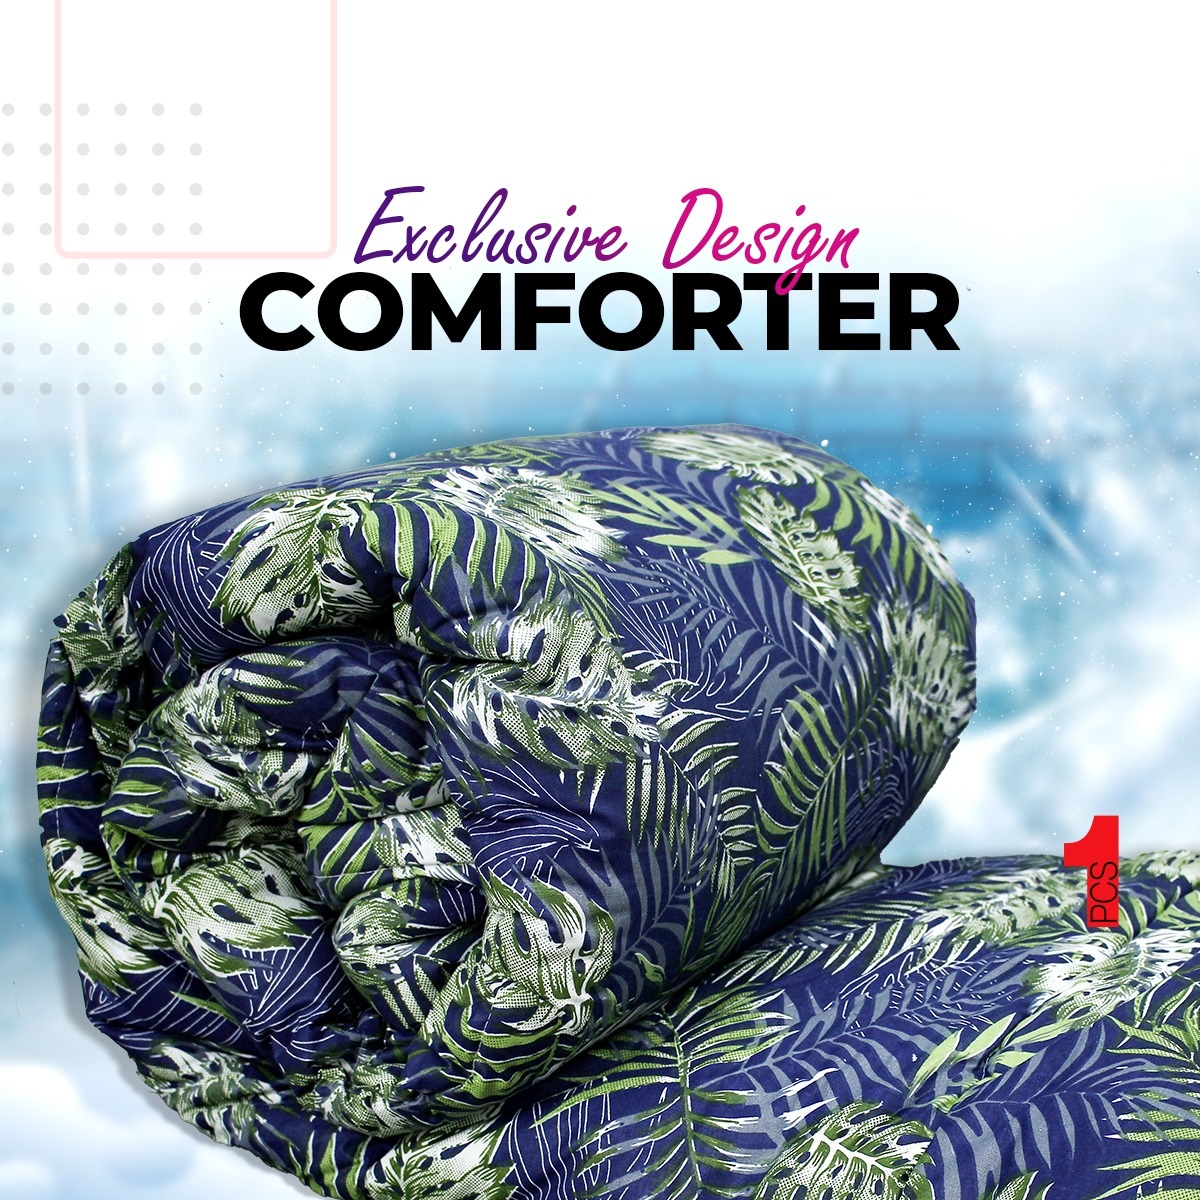 King Size Comforter Cotton Outside Fiber Filler Inside Too Warmth Perfect For Winter - LC007